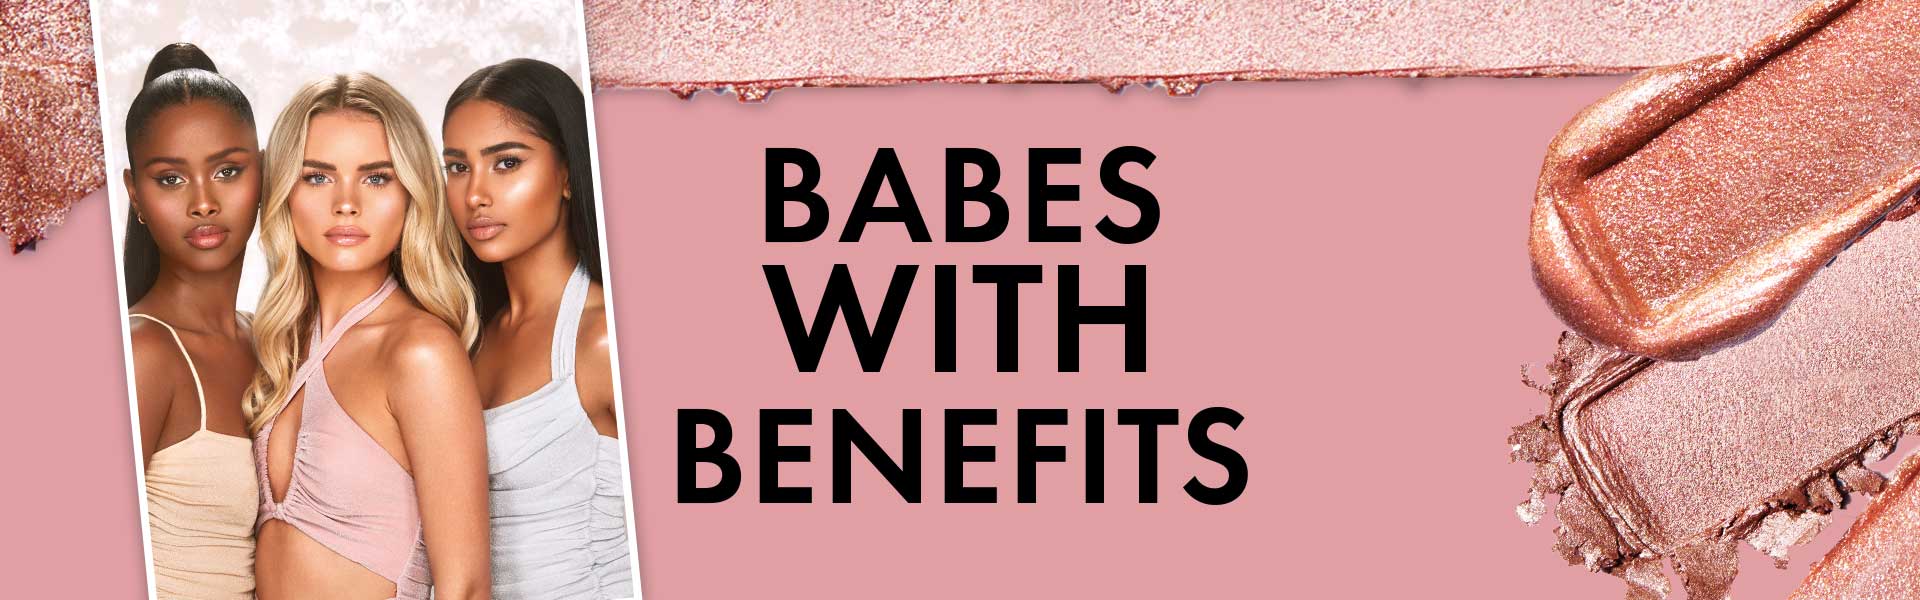 Babes With Benefits